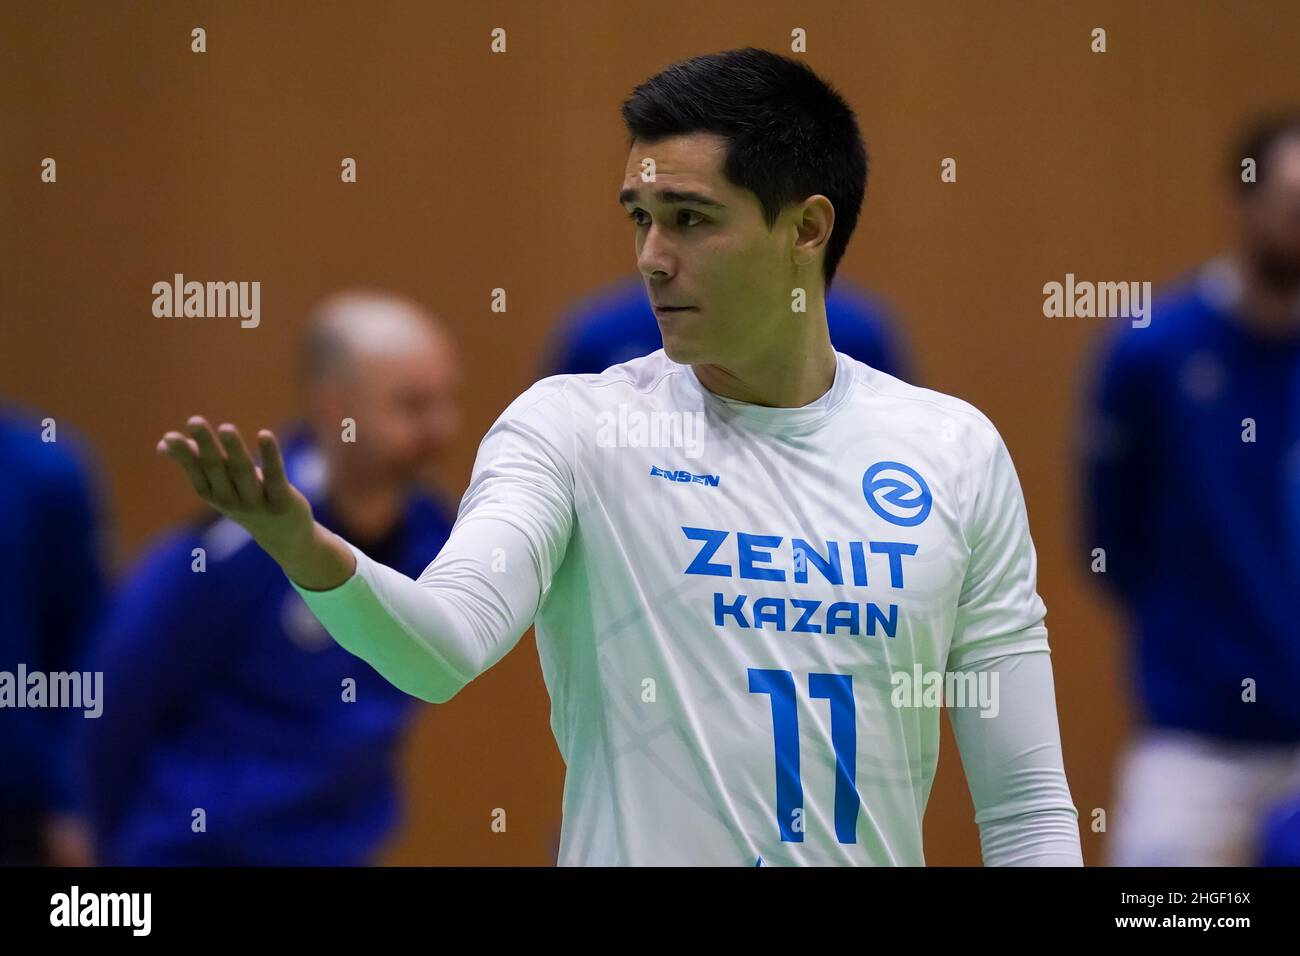 DOETINCHEM, NETHERLANDS - JANUARY 20: Micah Christenson of Zenit Kazan  gestures during the CEV Cup match between Active Living Orion and Zenit  Kazan at the Topsporthal Achterhoek on January 20, 2022 in